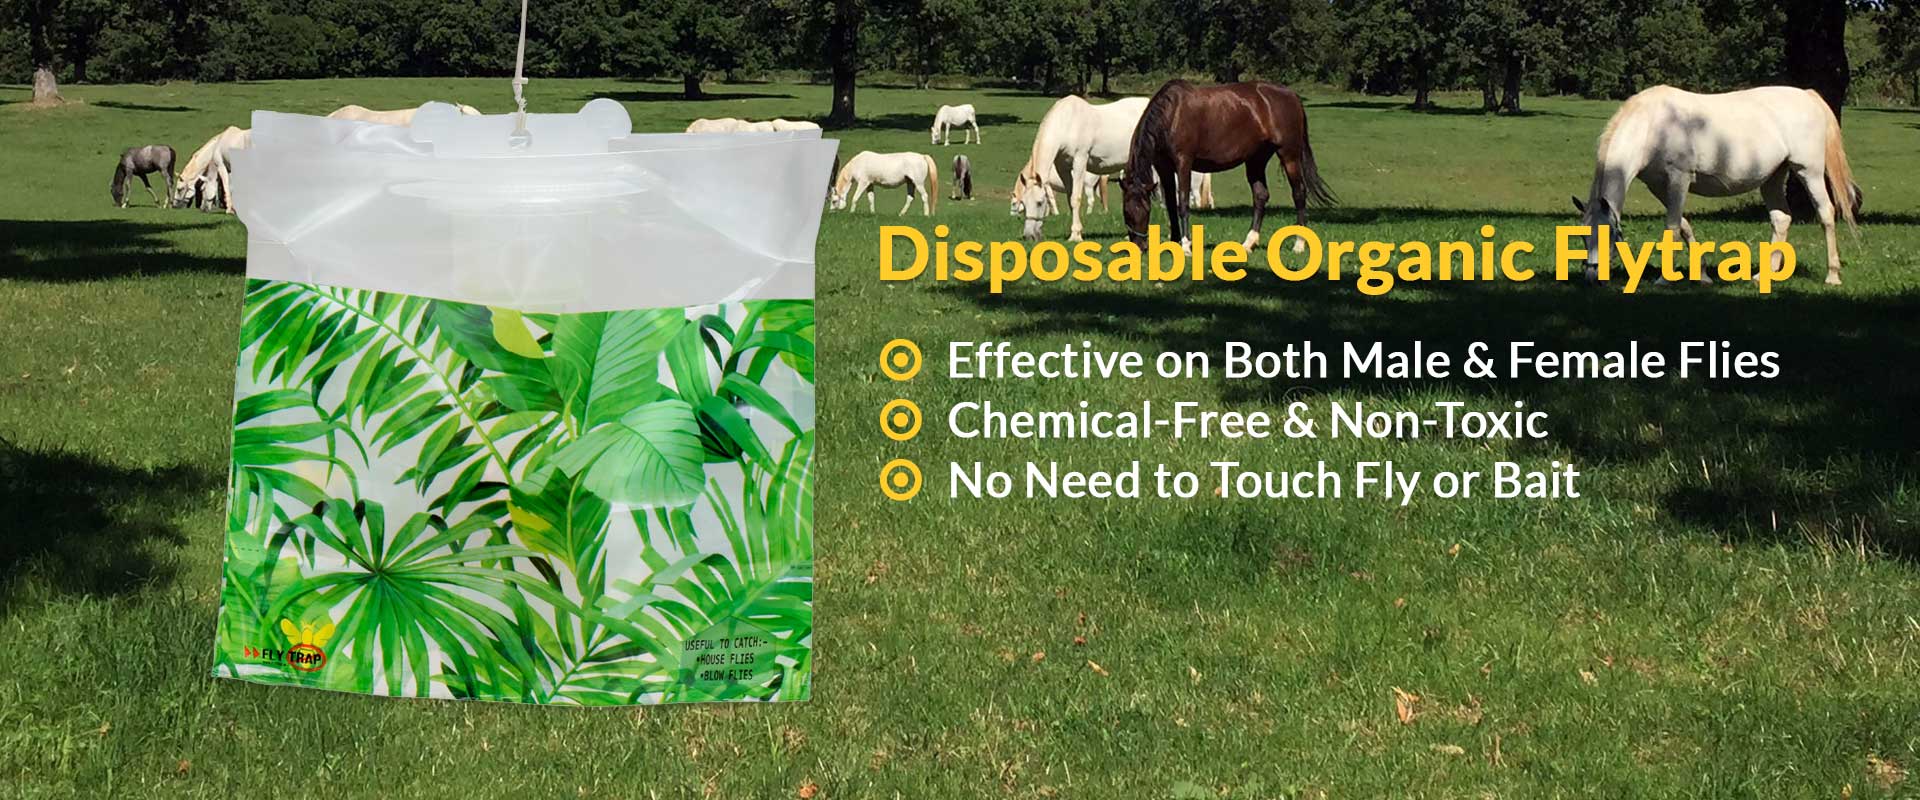 Disposable Fly Trap Manufacturers in Delhi